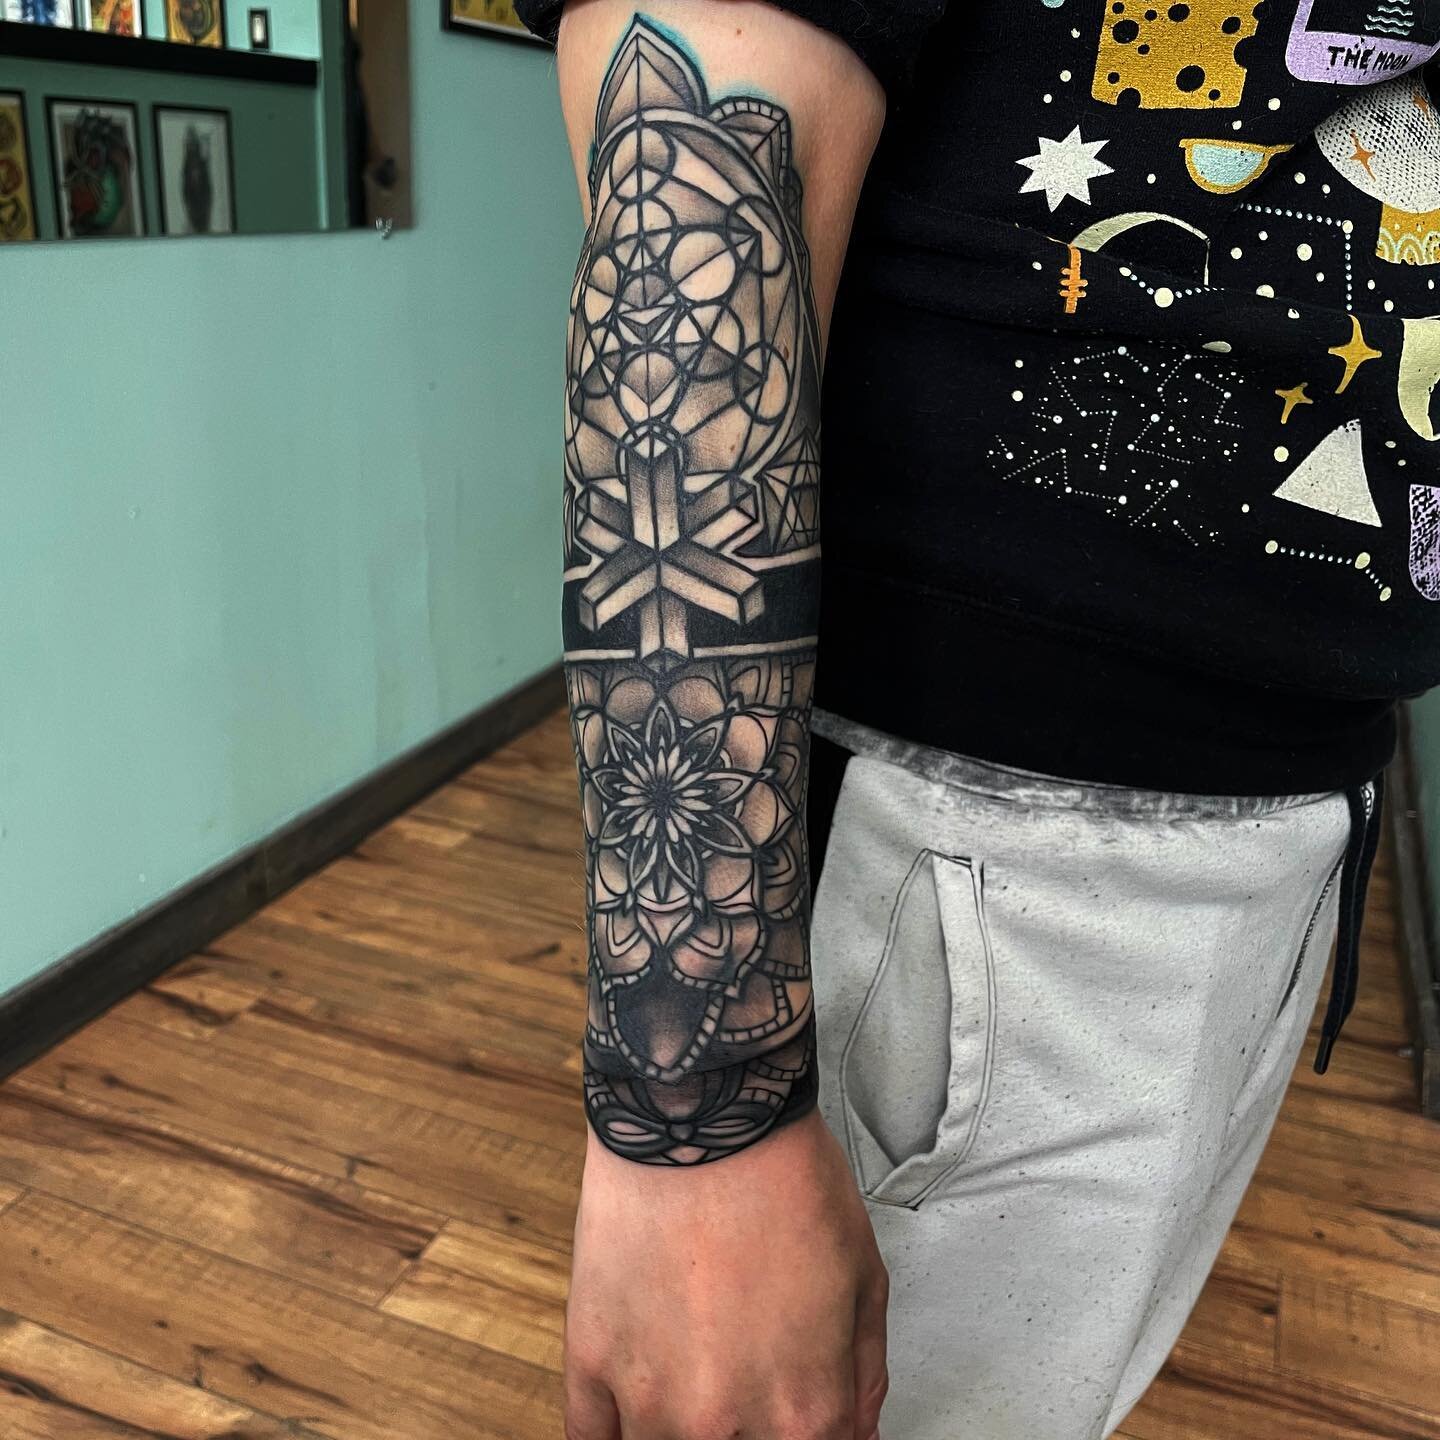 Finished this first half and of a geometric sleeve